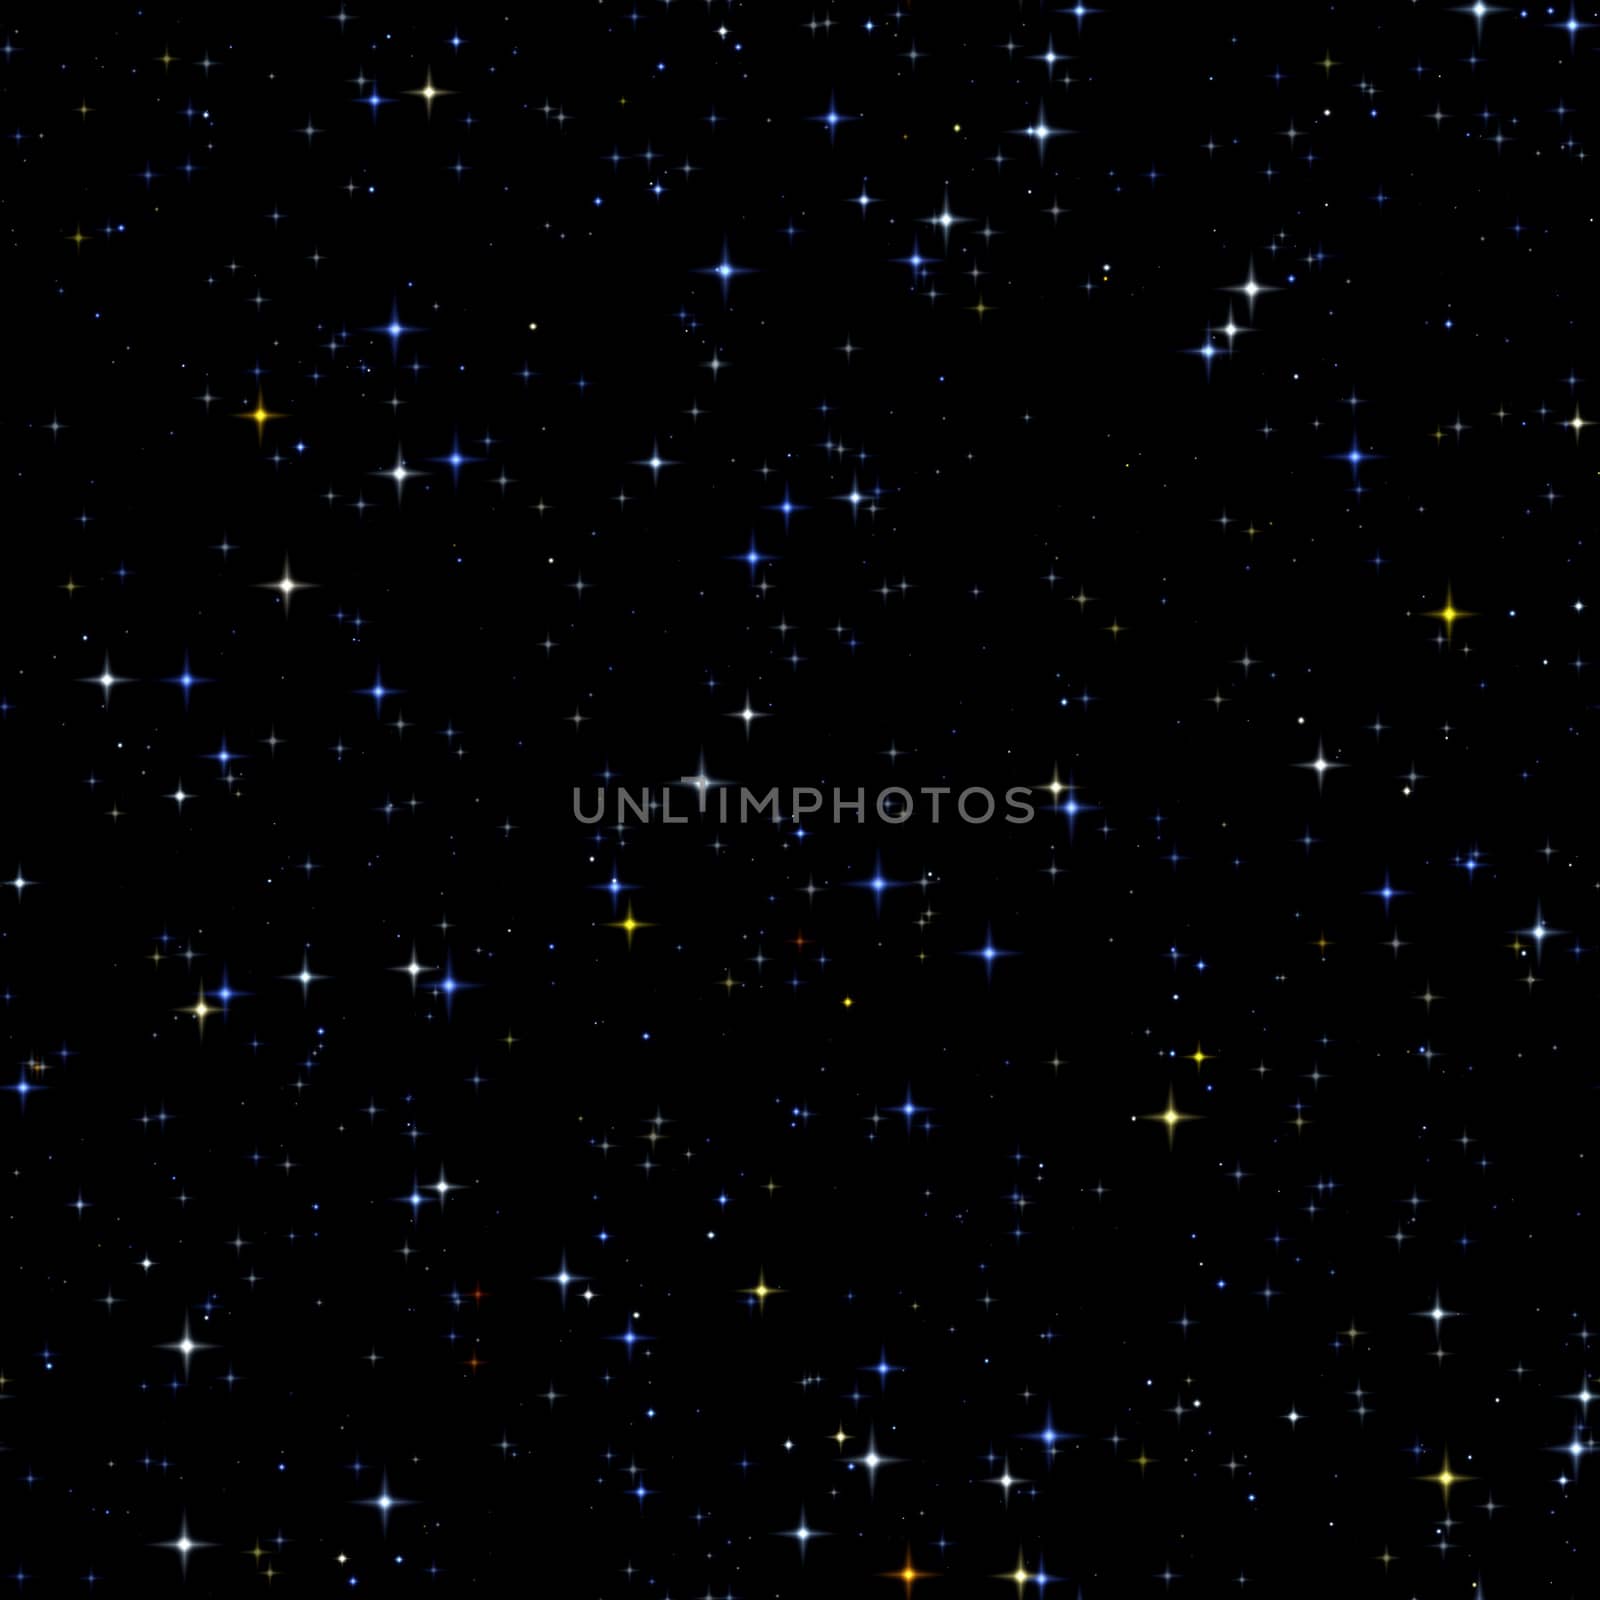 2d illustration of a seamless stars background